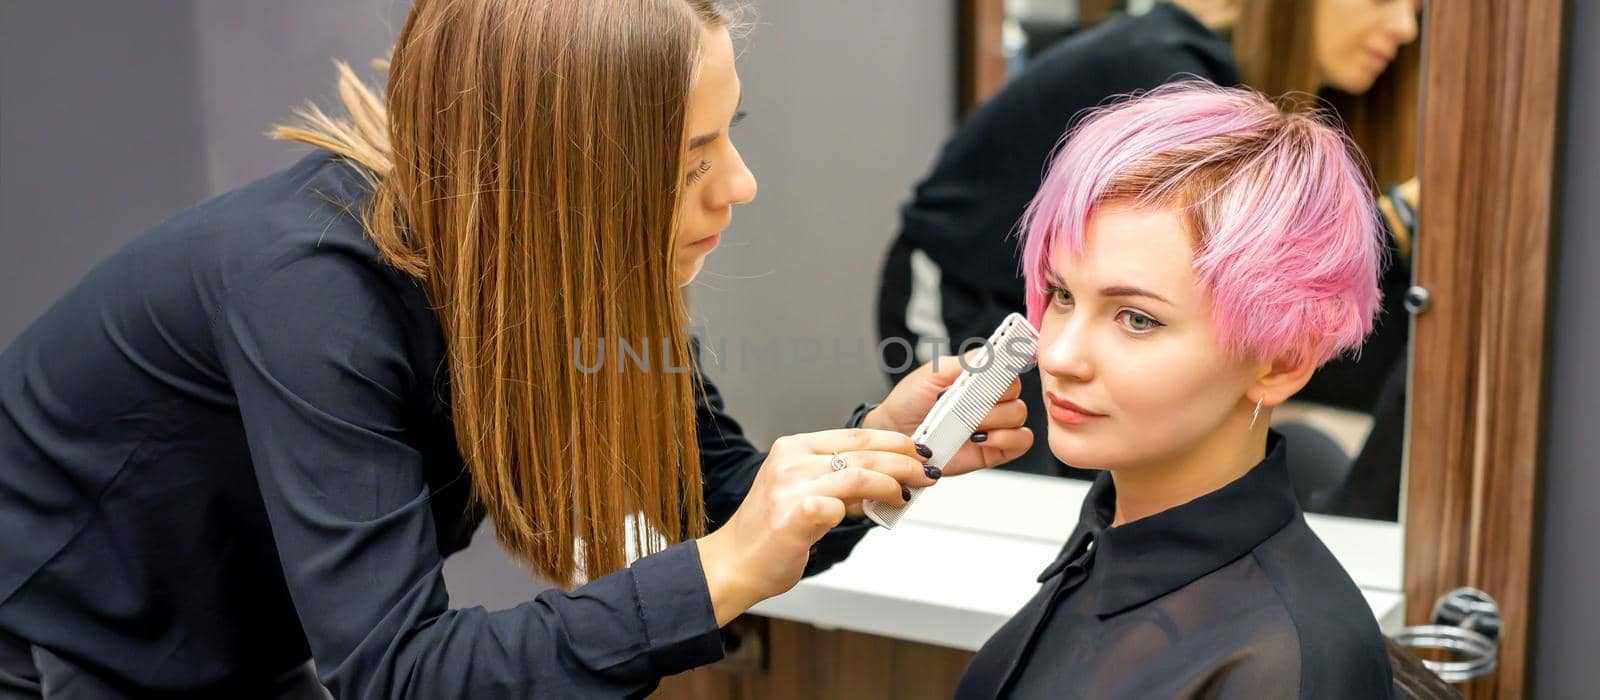 Hairdresser with comb is checking out and fixing the short pink hairstyle of the young white woman in a hair salon